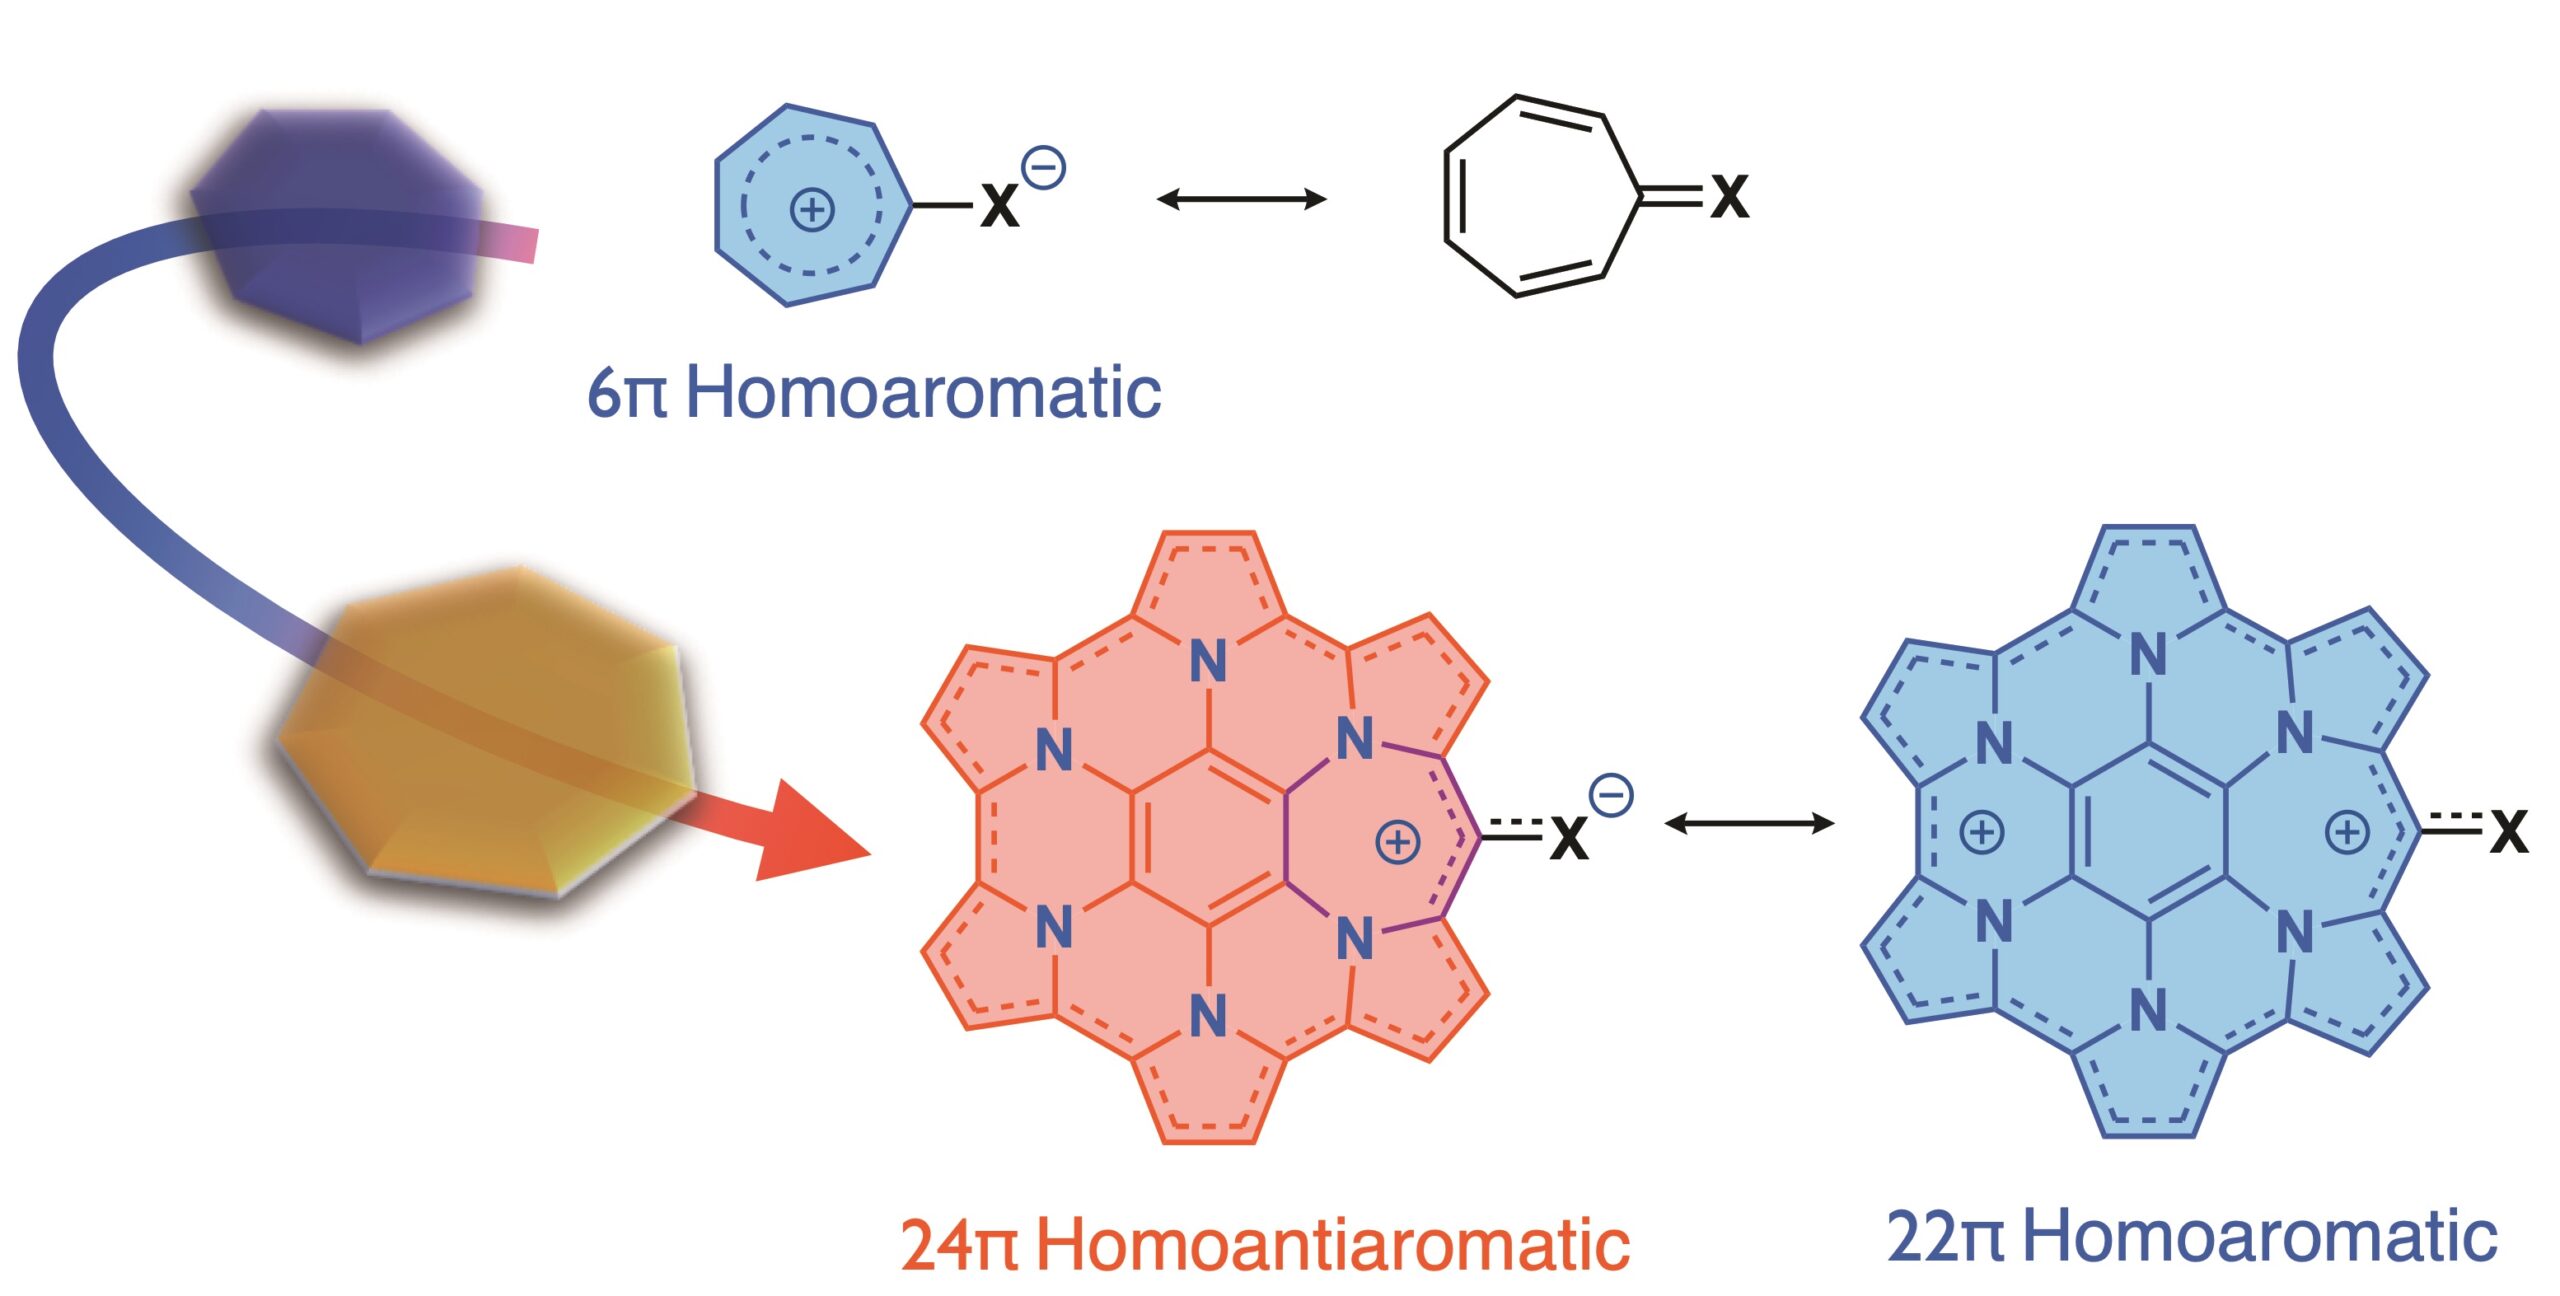 Is it possible to develop antiaromaticity by nonbenzenoid aromatic compounds?